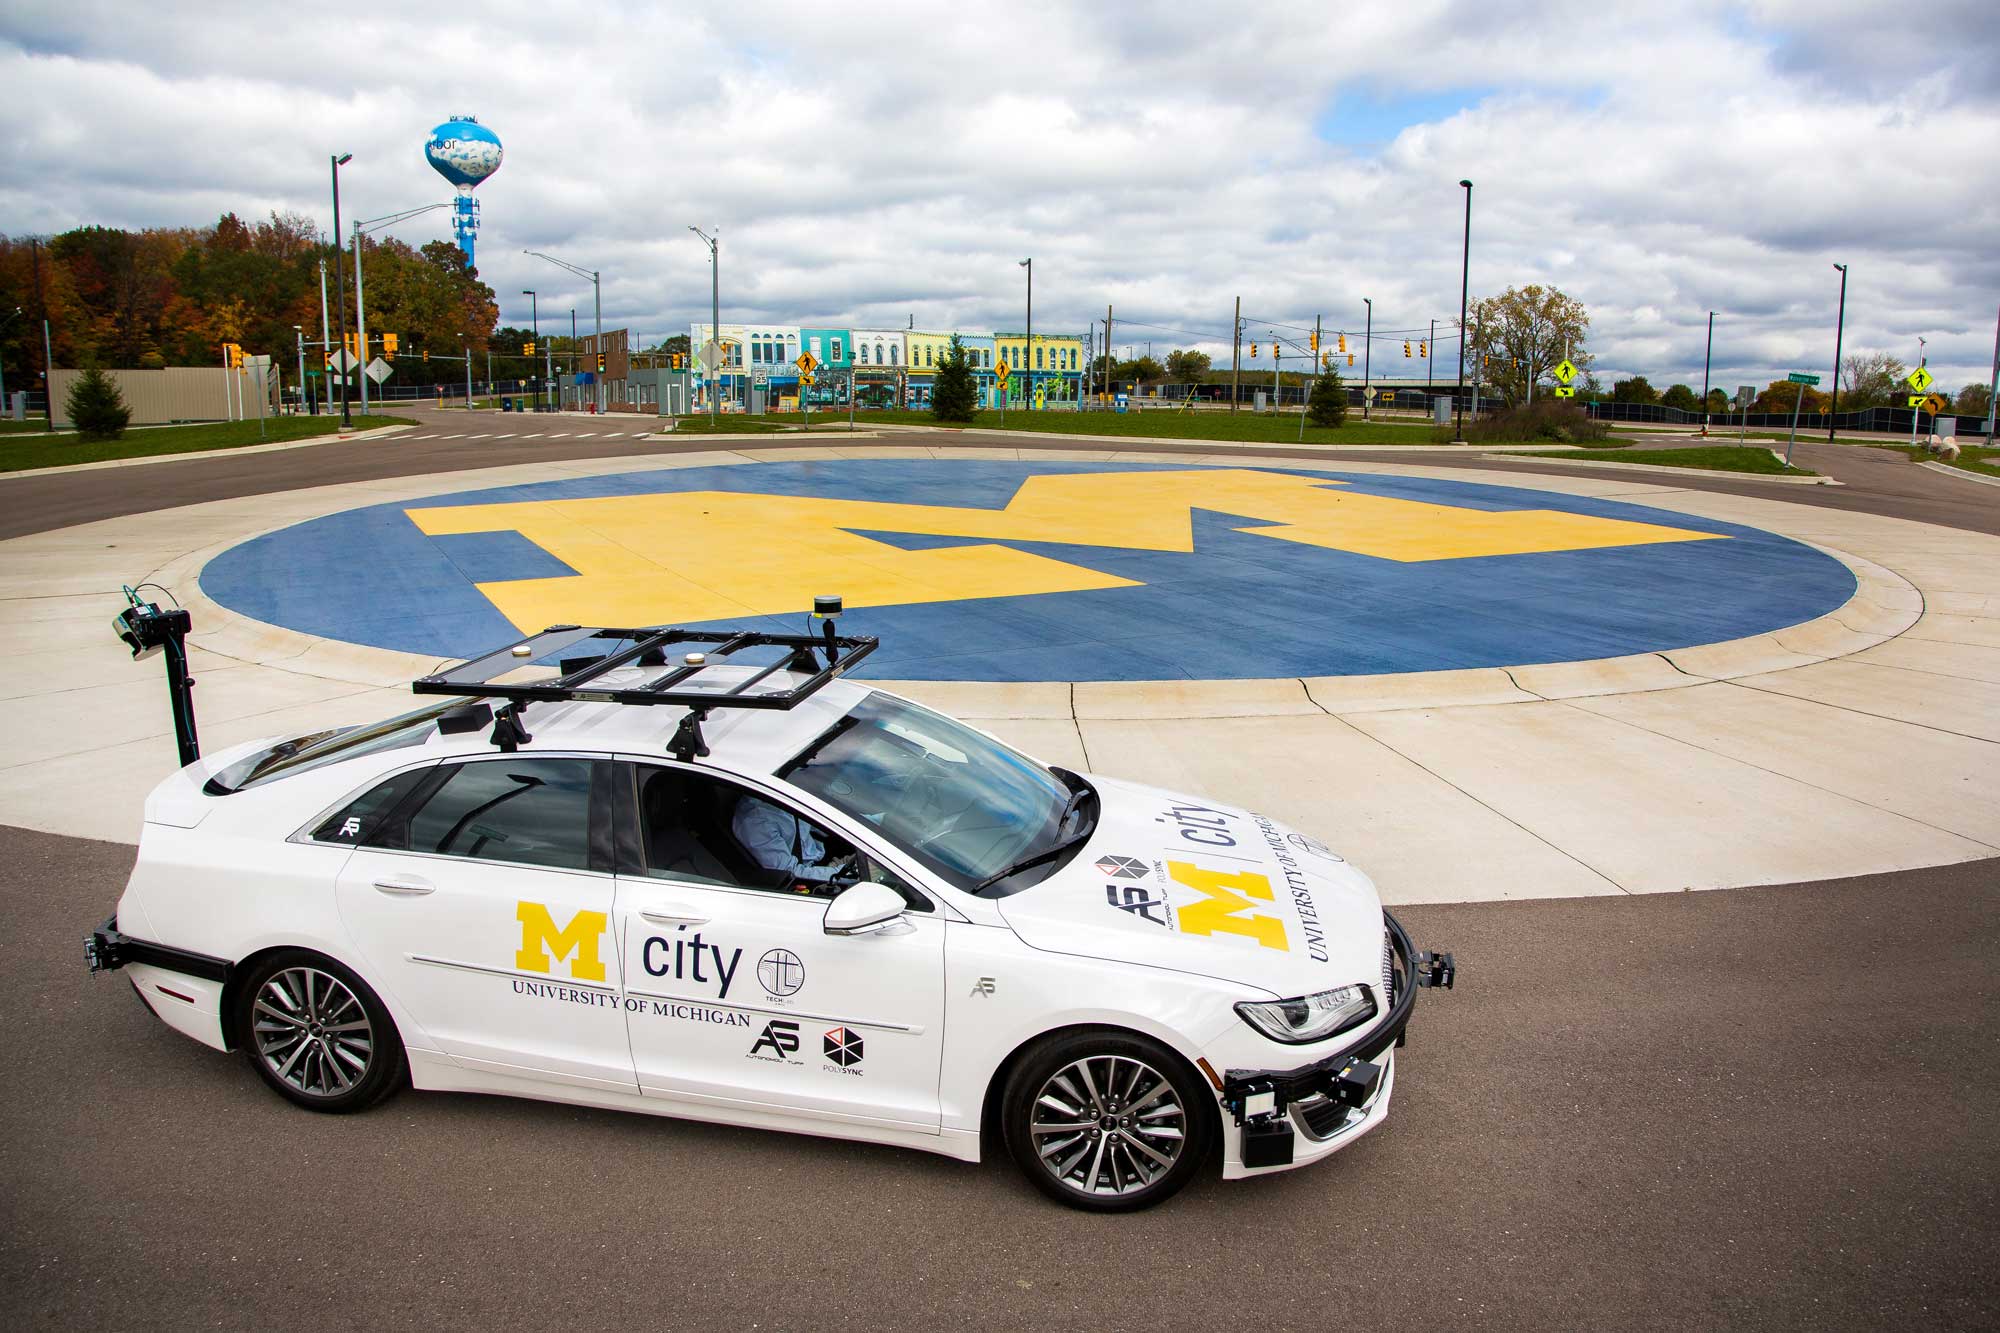 A specially equipped Lincoln MKZ, based at Mcity, is an open-source connected and automated research vehicle available to U-M faculty and students, startups and others to help accelerate innovation